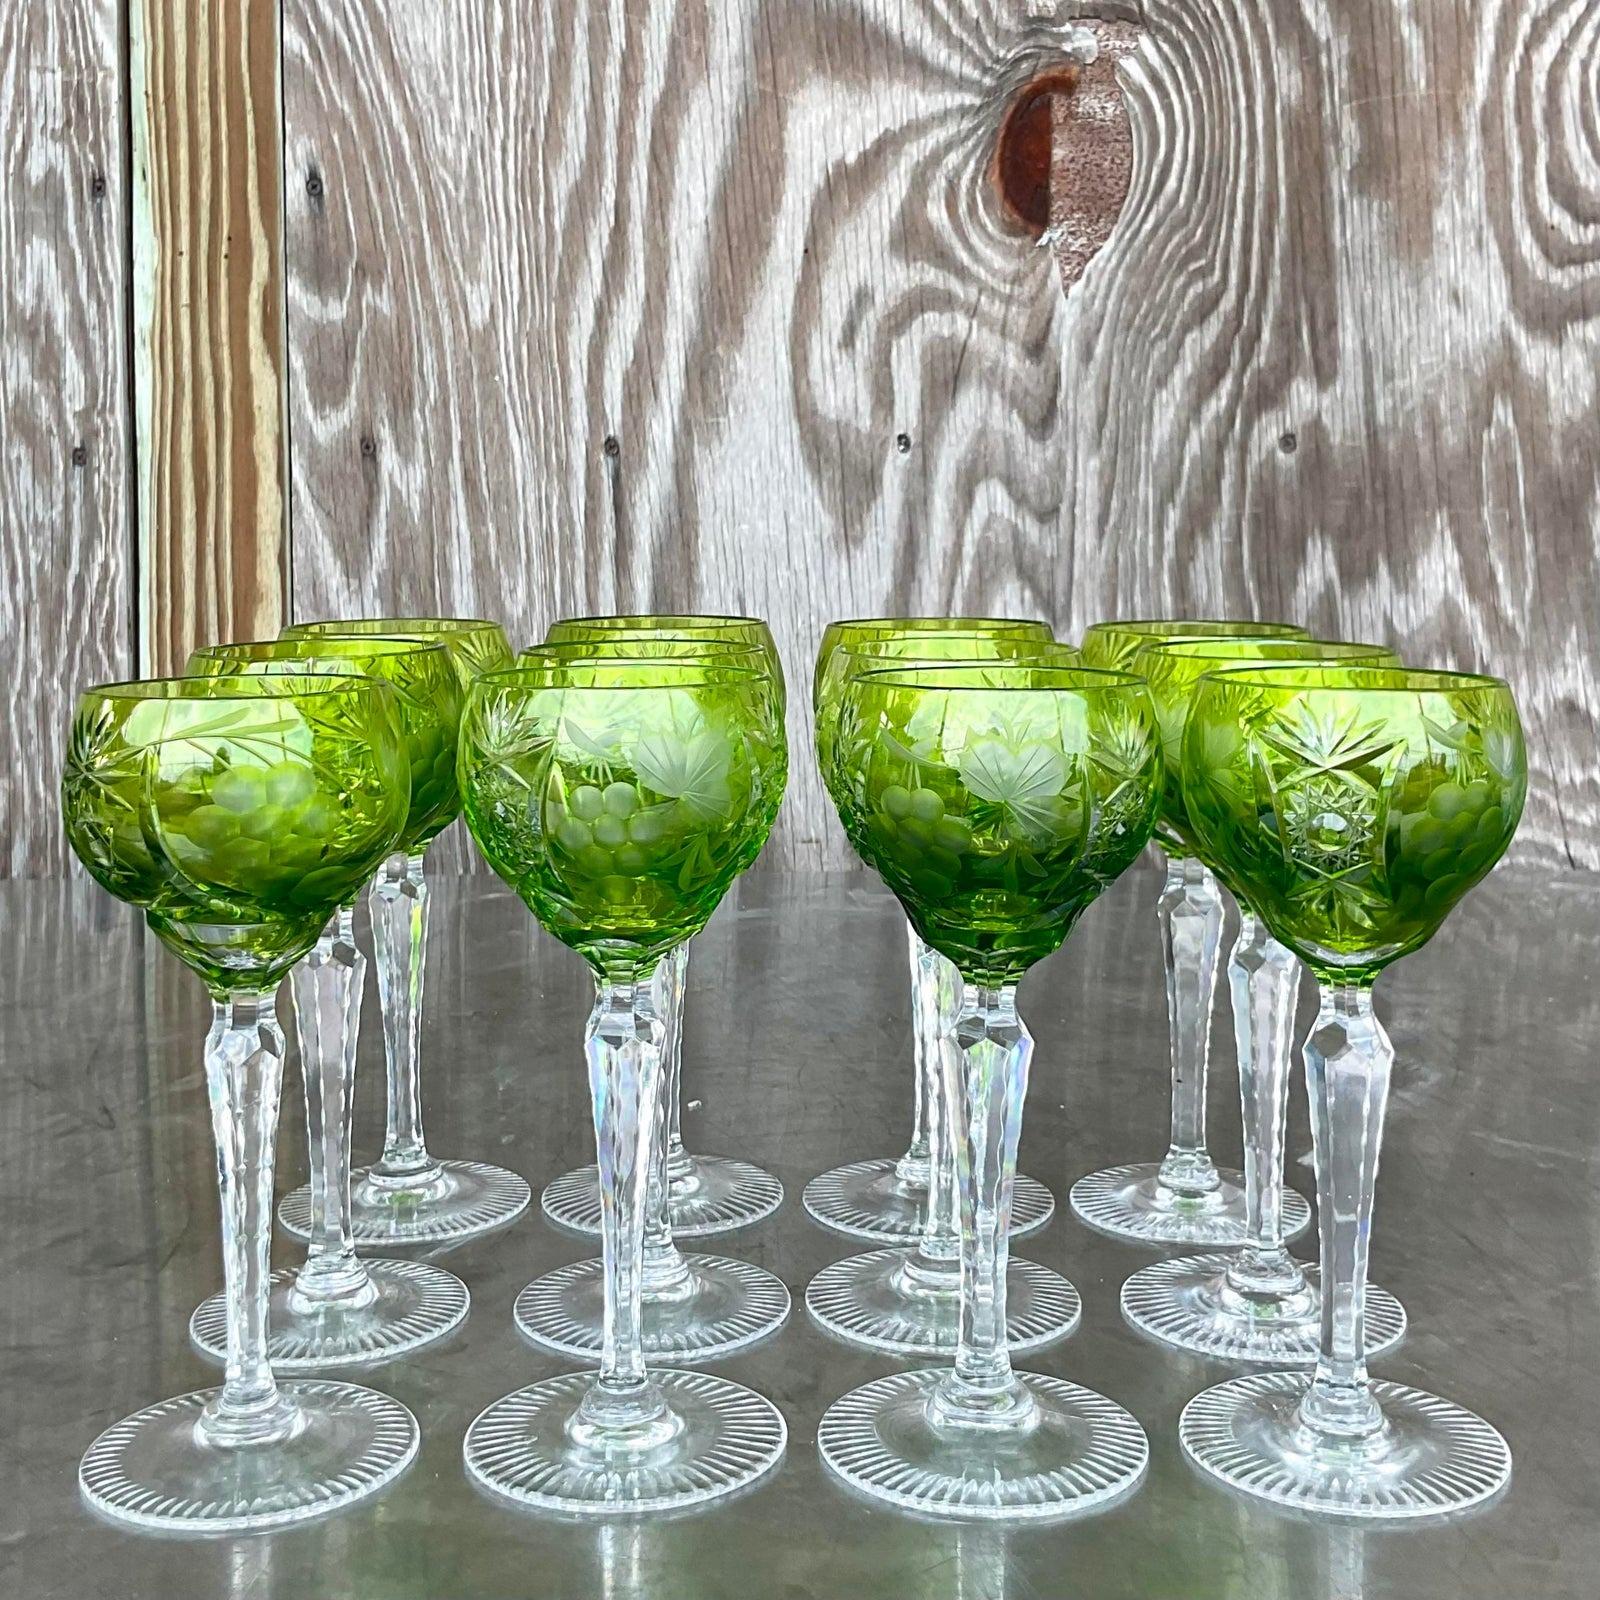 A stunning set of vintage Regency wine glasses. Chic emerald cut crystal in a floating leaf motif. Long faceted stems. Acquired from a Palm Beach estate